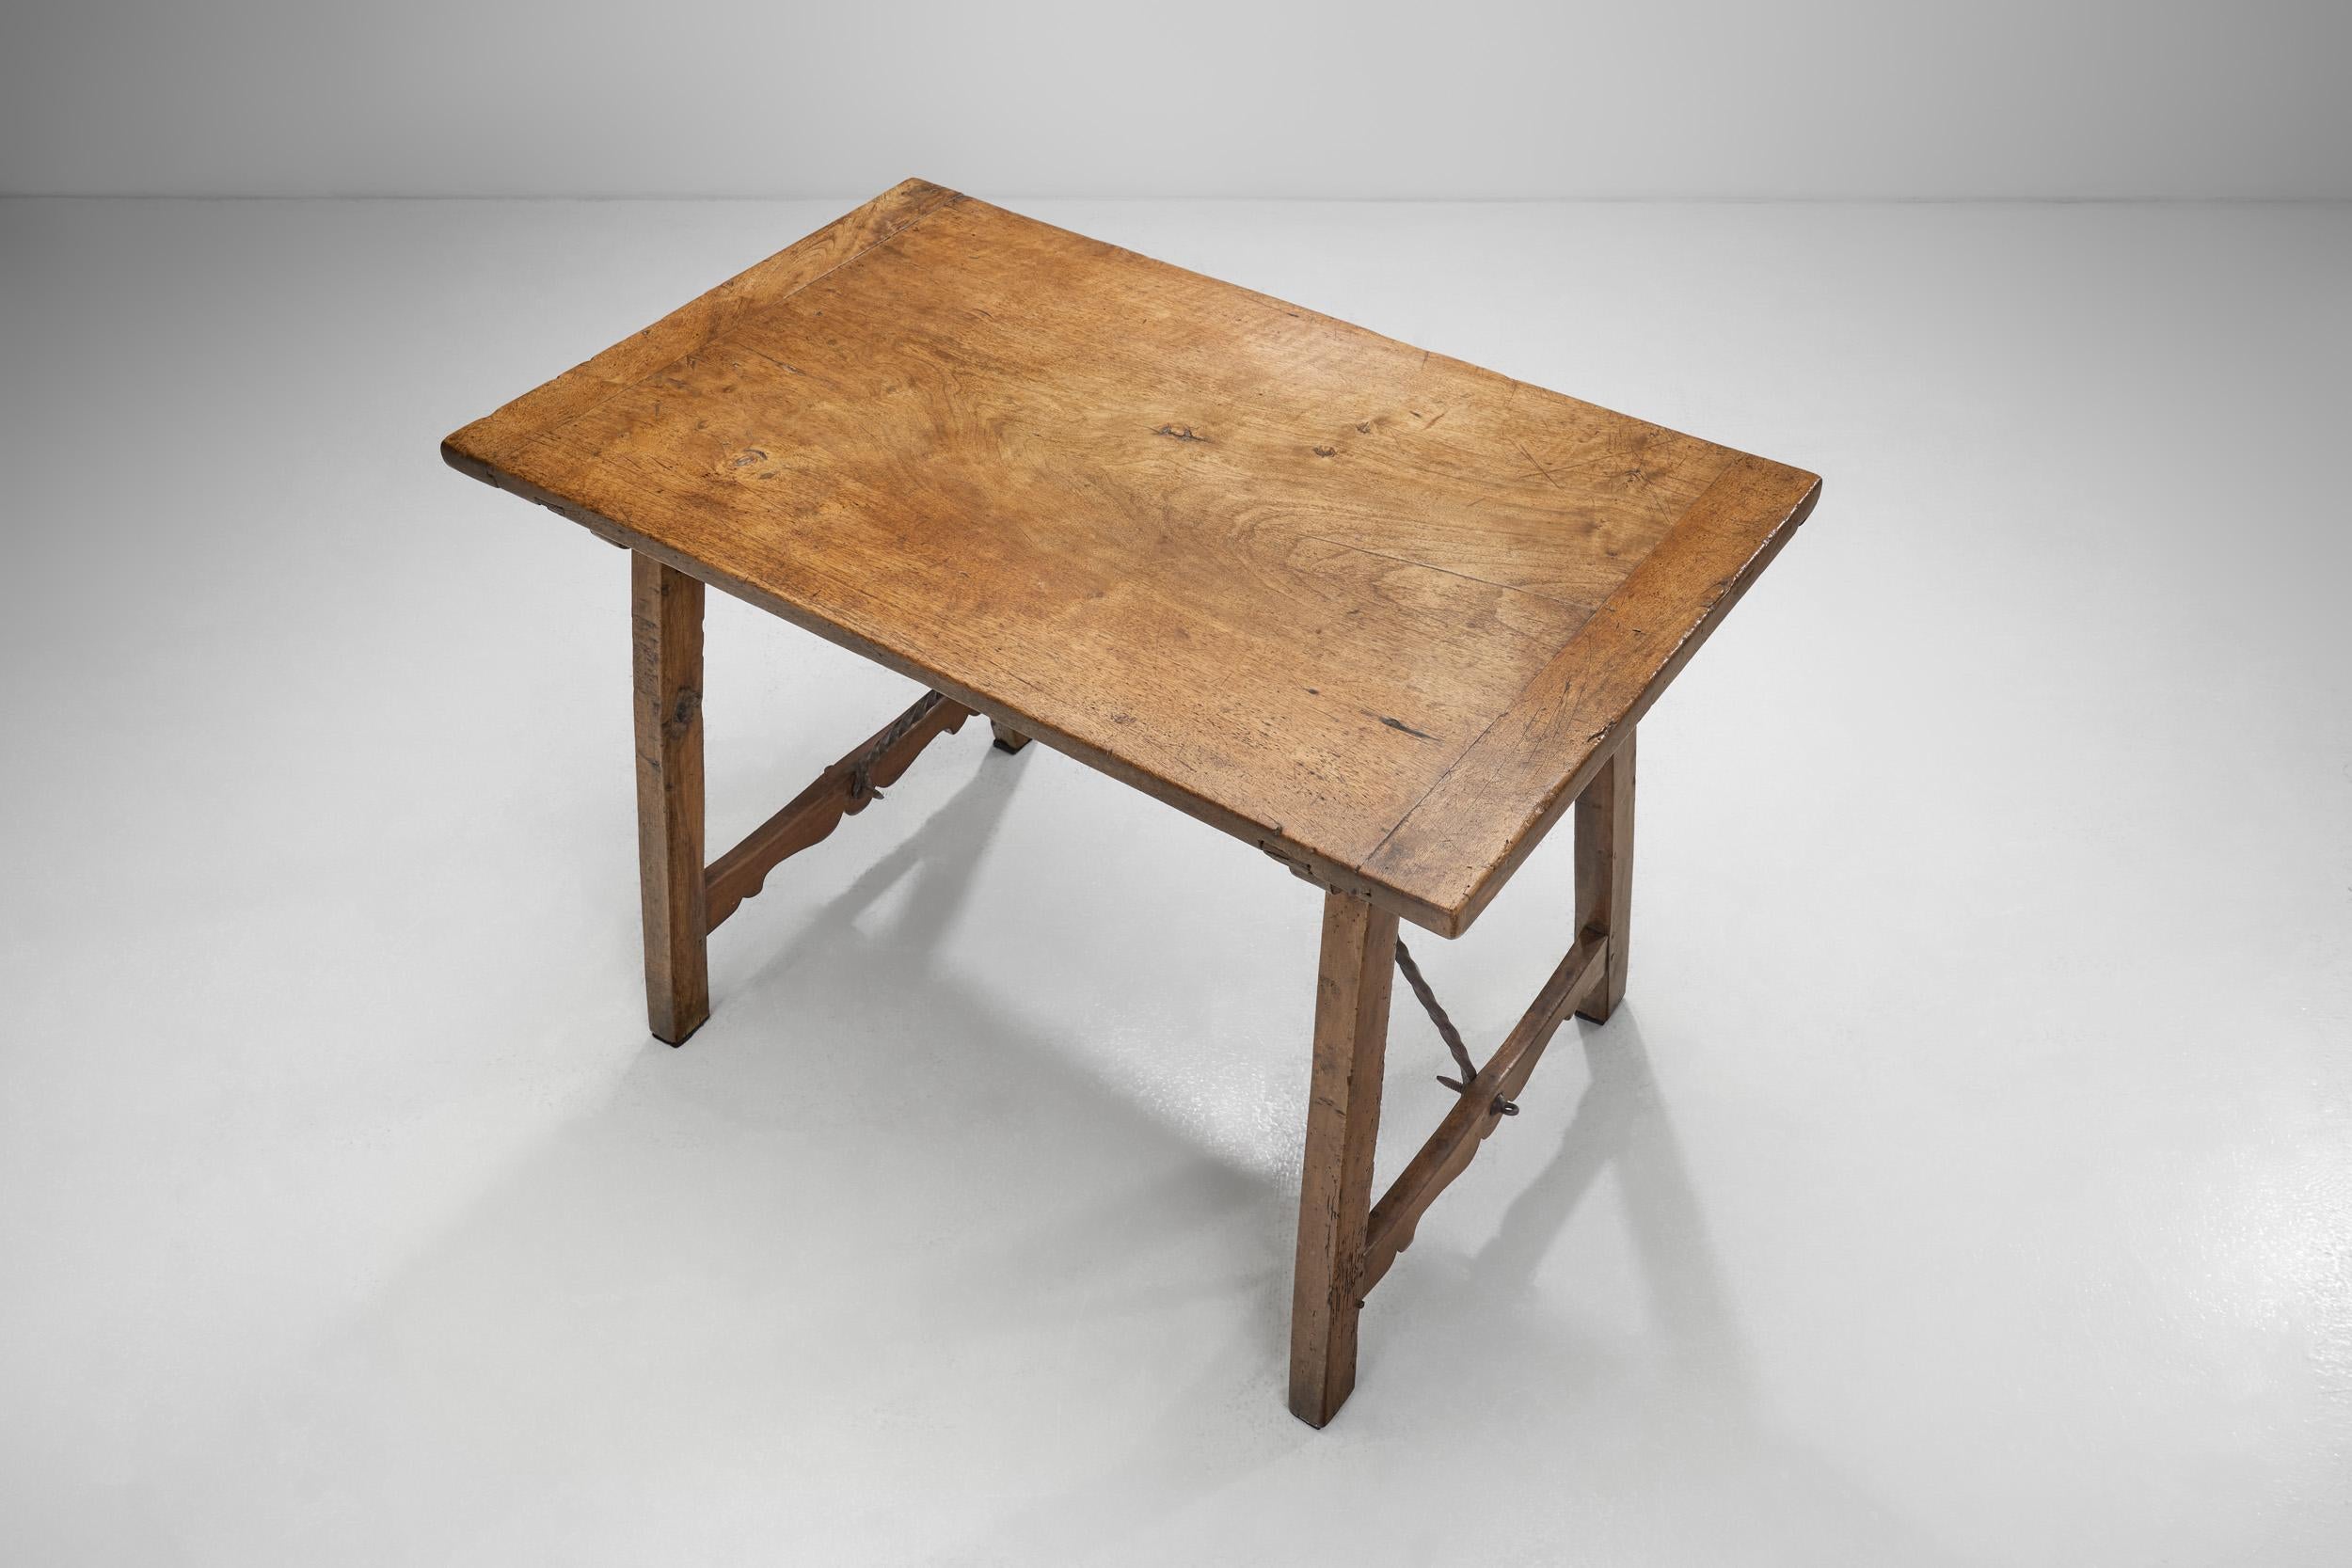 Spanish Walnut and Wrought Iron Table, Spain late 18th century For Sale 1